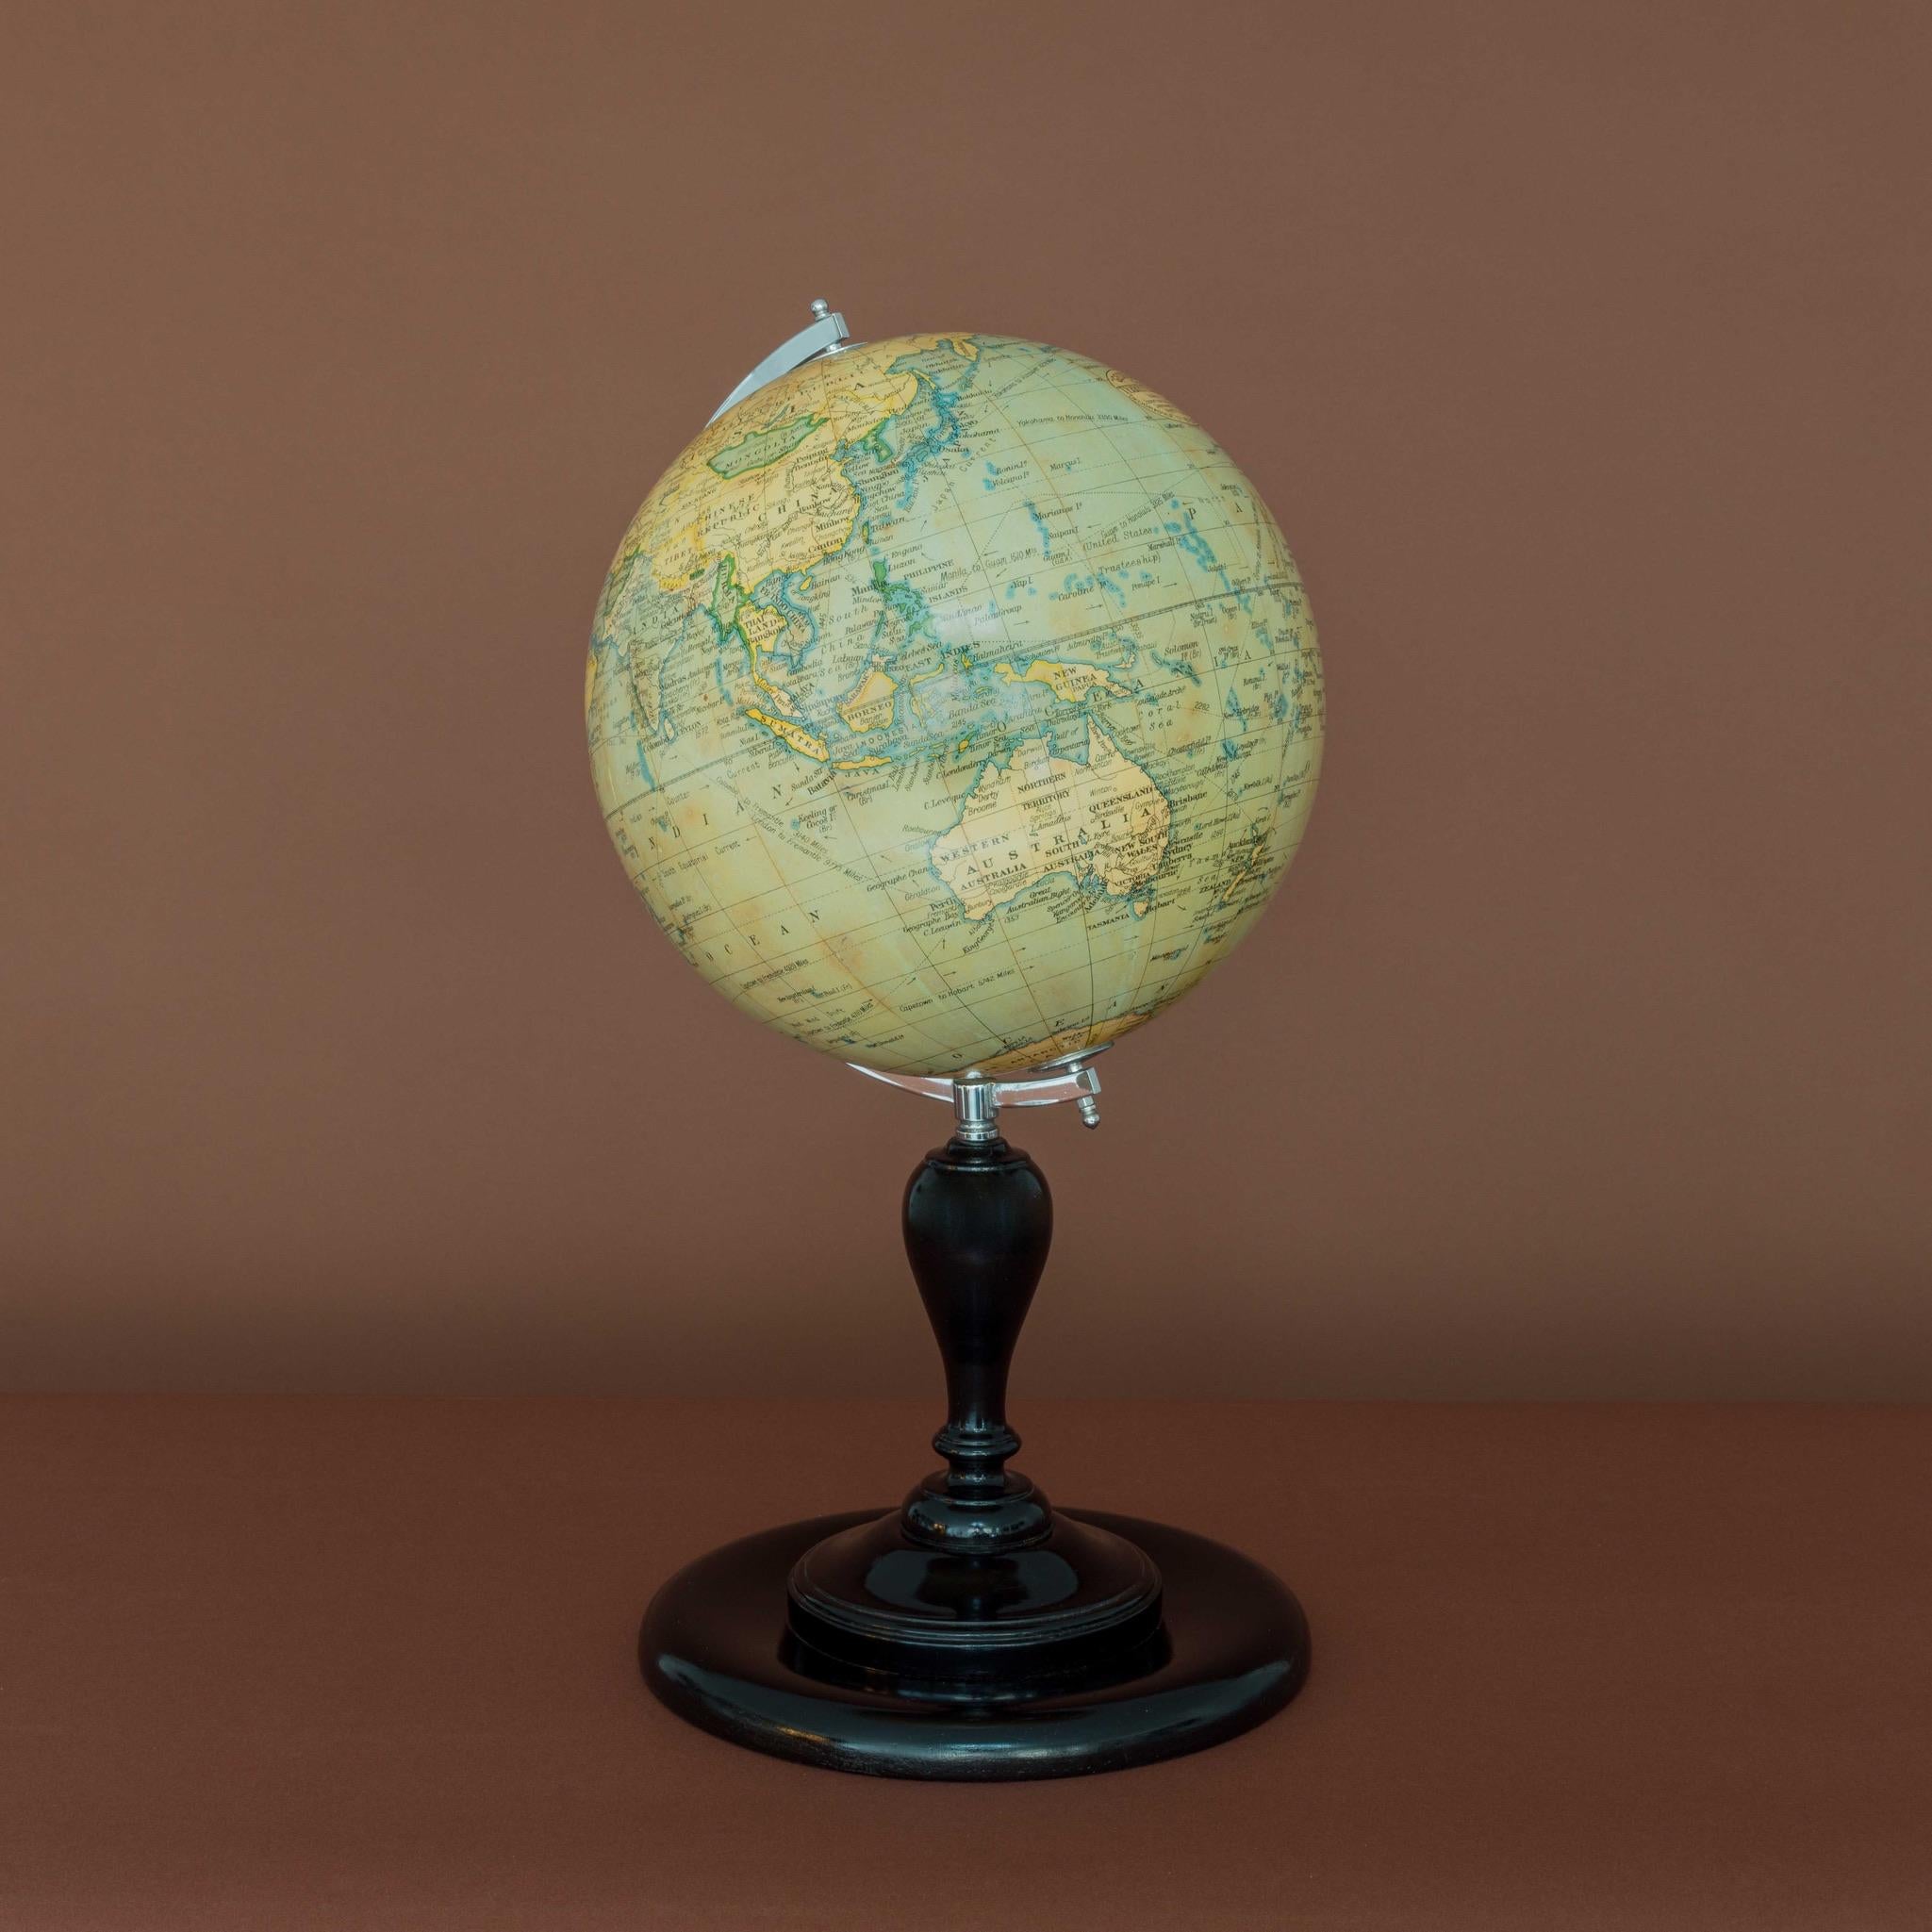 A fine 10 inch terrestrial globe by Geographia of Fleet Street London. With chromed semi-meridian on a turned wooden upright and circular base that has an ebonised finish. Circa 1955. Printed in several colours, the globe comprises of twelve coated